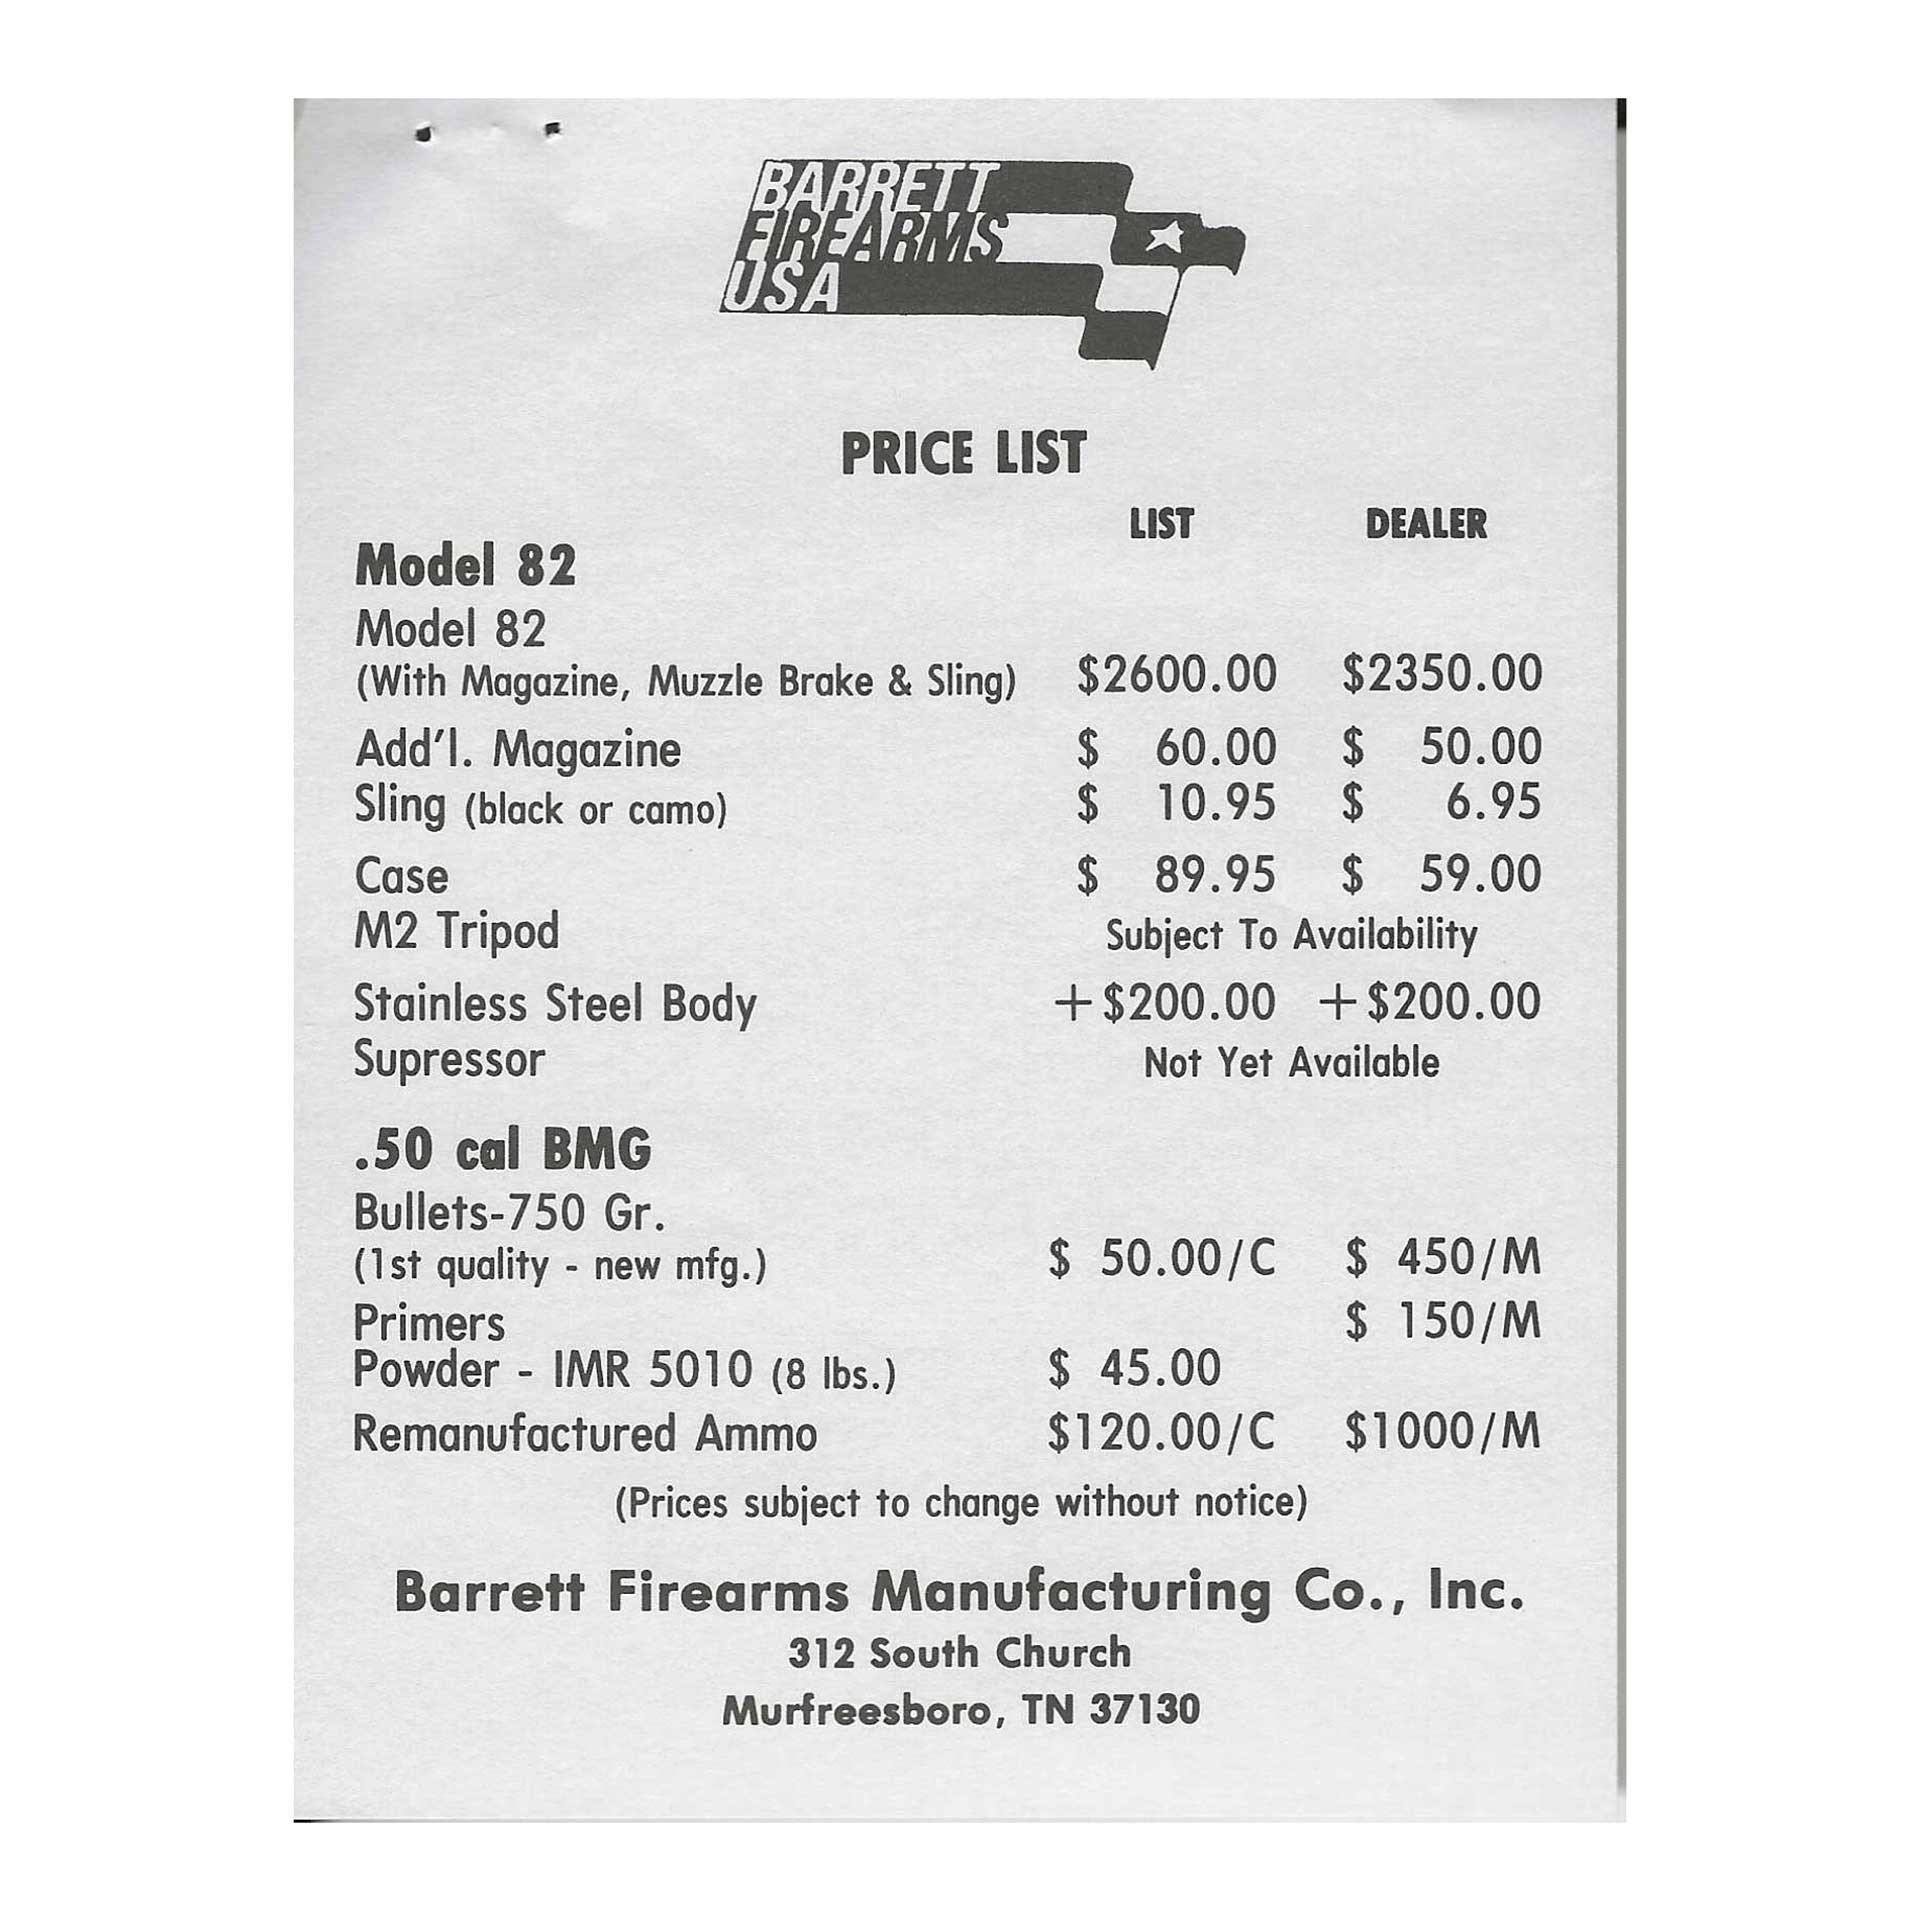 Barrett Firearms sell shit price list for guns and accessories